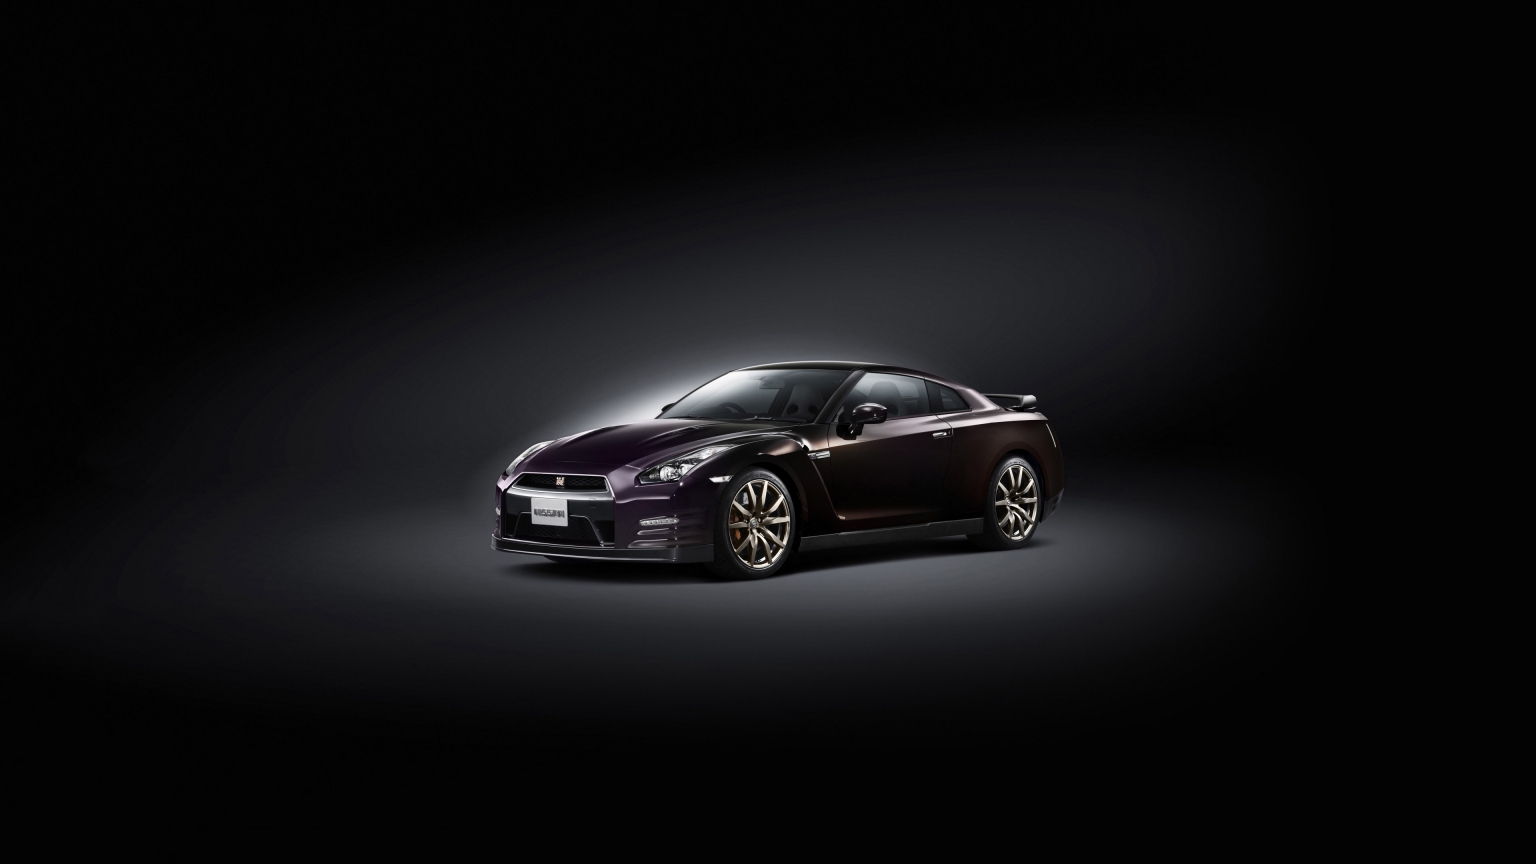 Nissan GT-R Special Edition 2014 for 1536 x 864 HDTV resolution